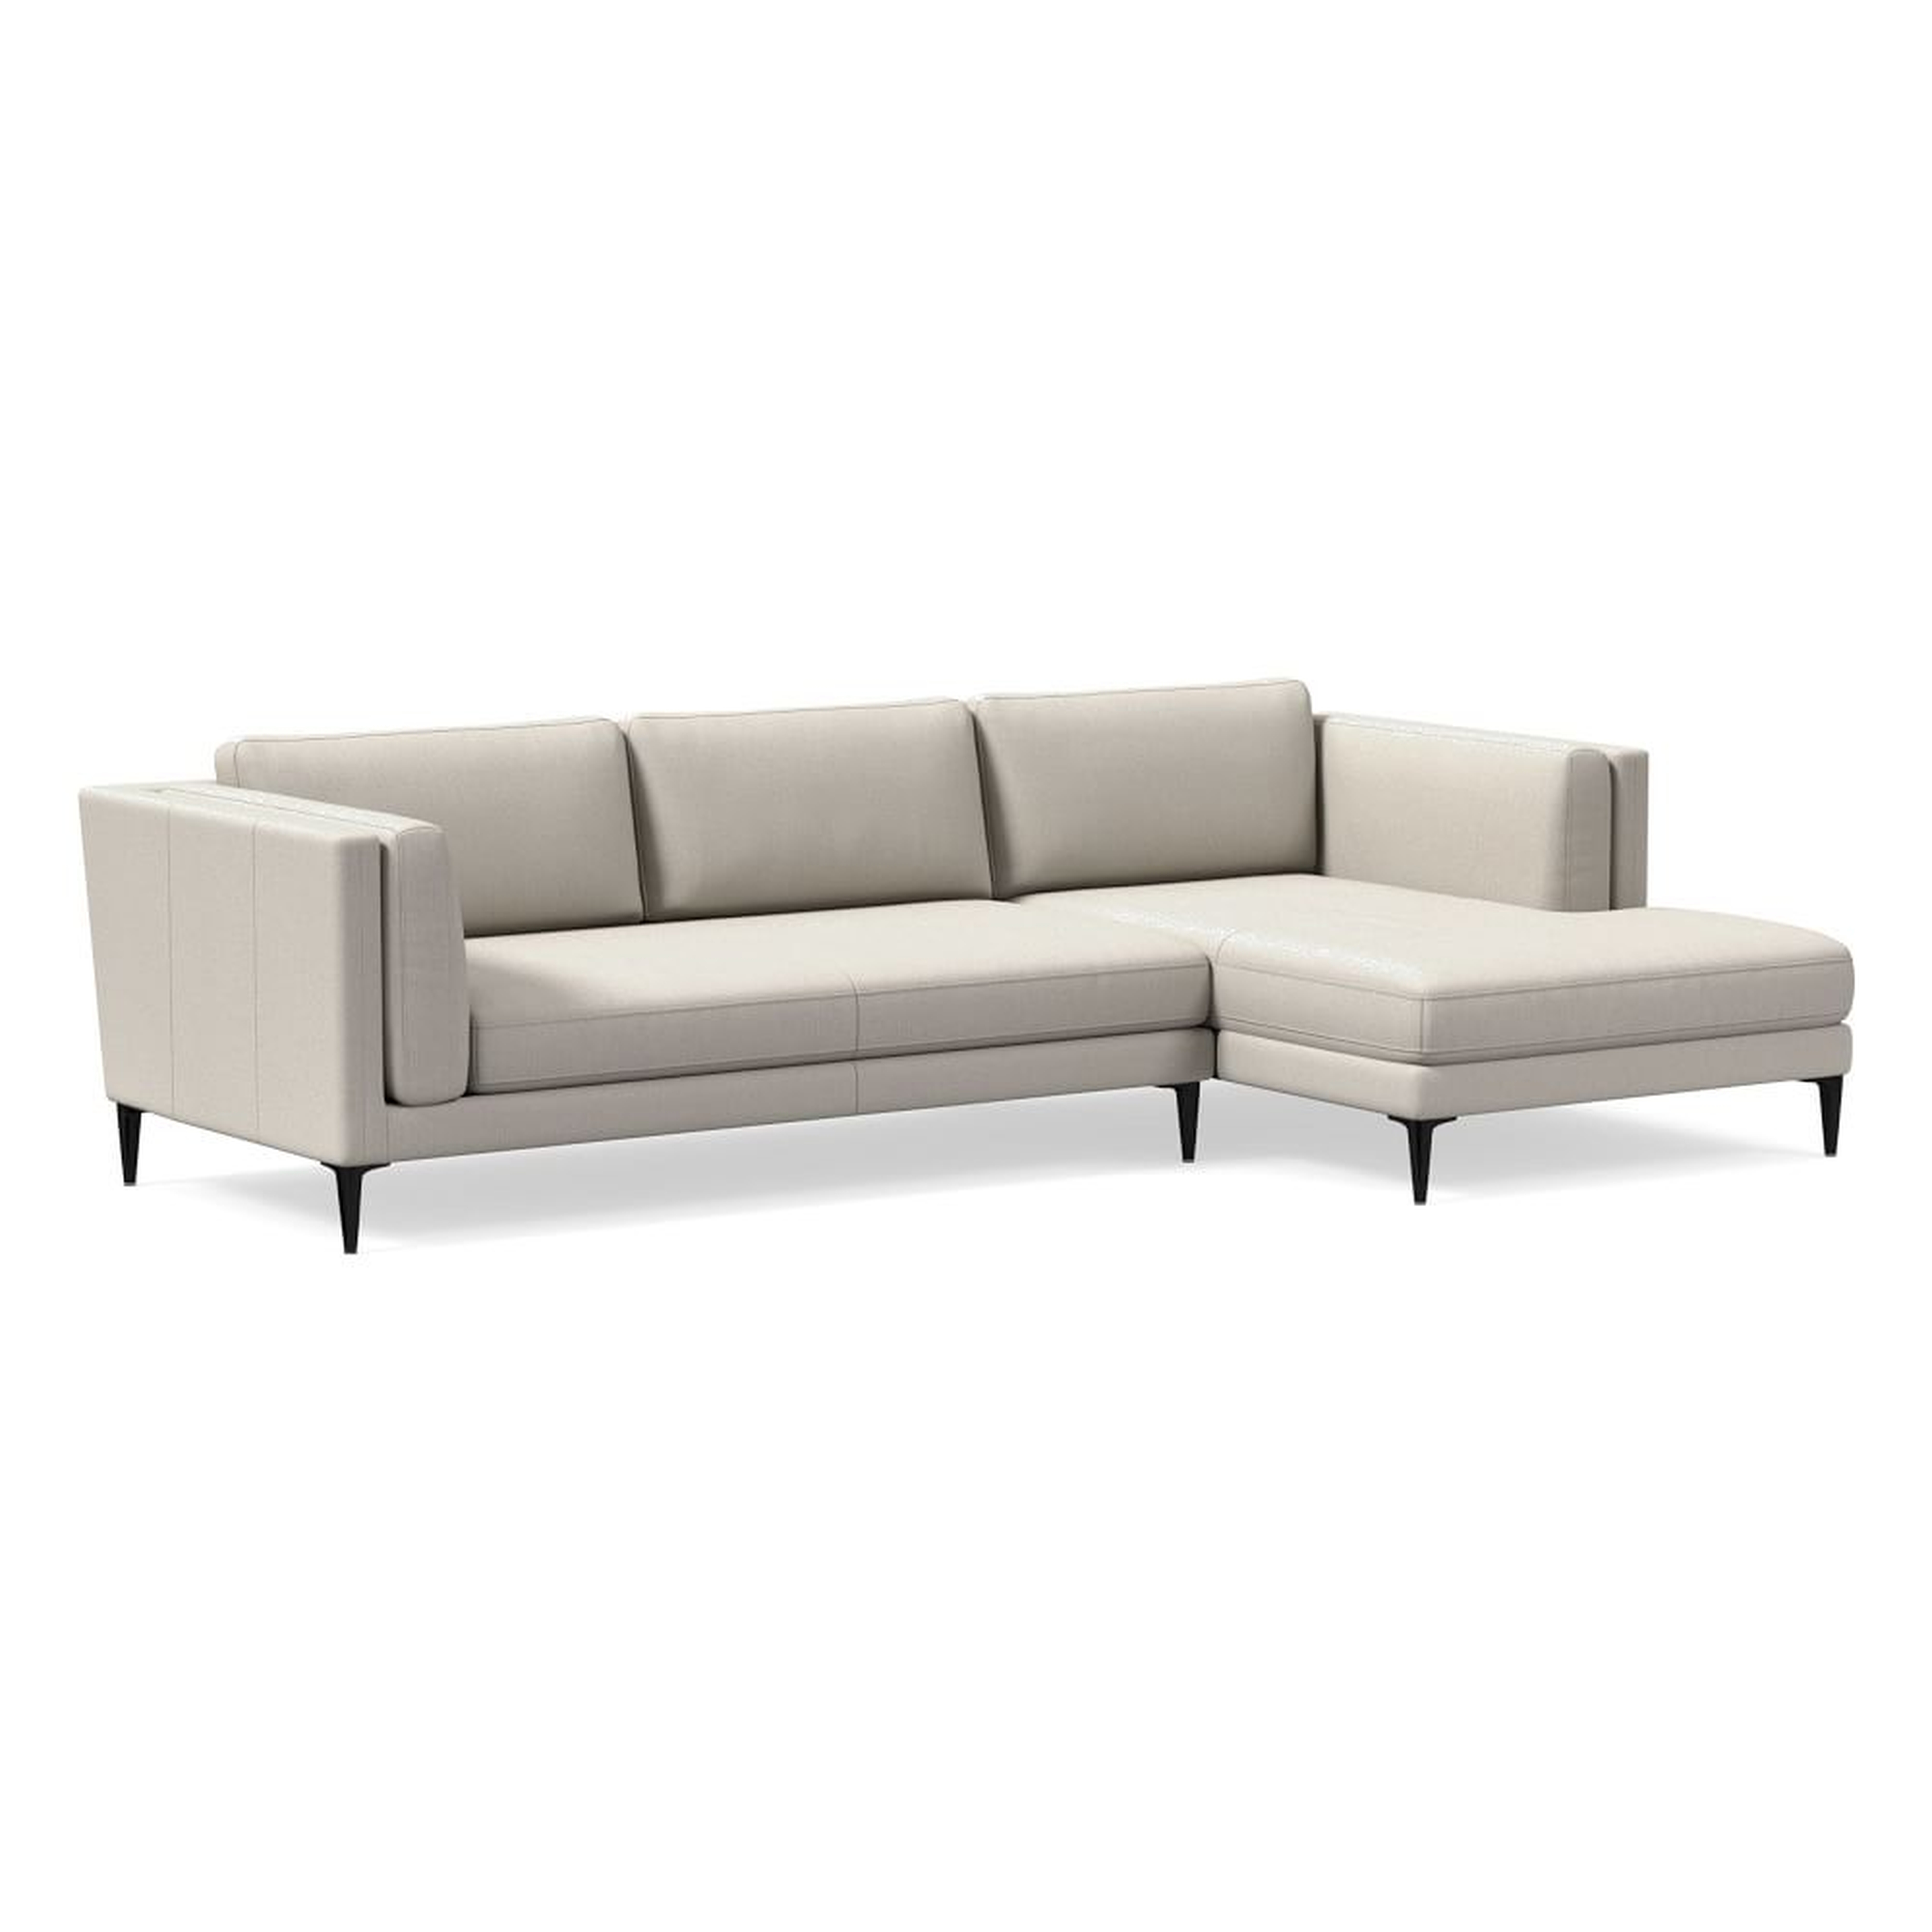 Anton 105" Right 2-Piece Chaise Sectional, Yarn Dyed Linen Weave, Alabaster, Dark Pewter - West Elm